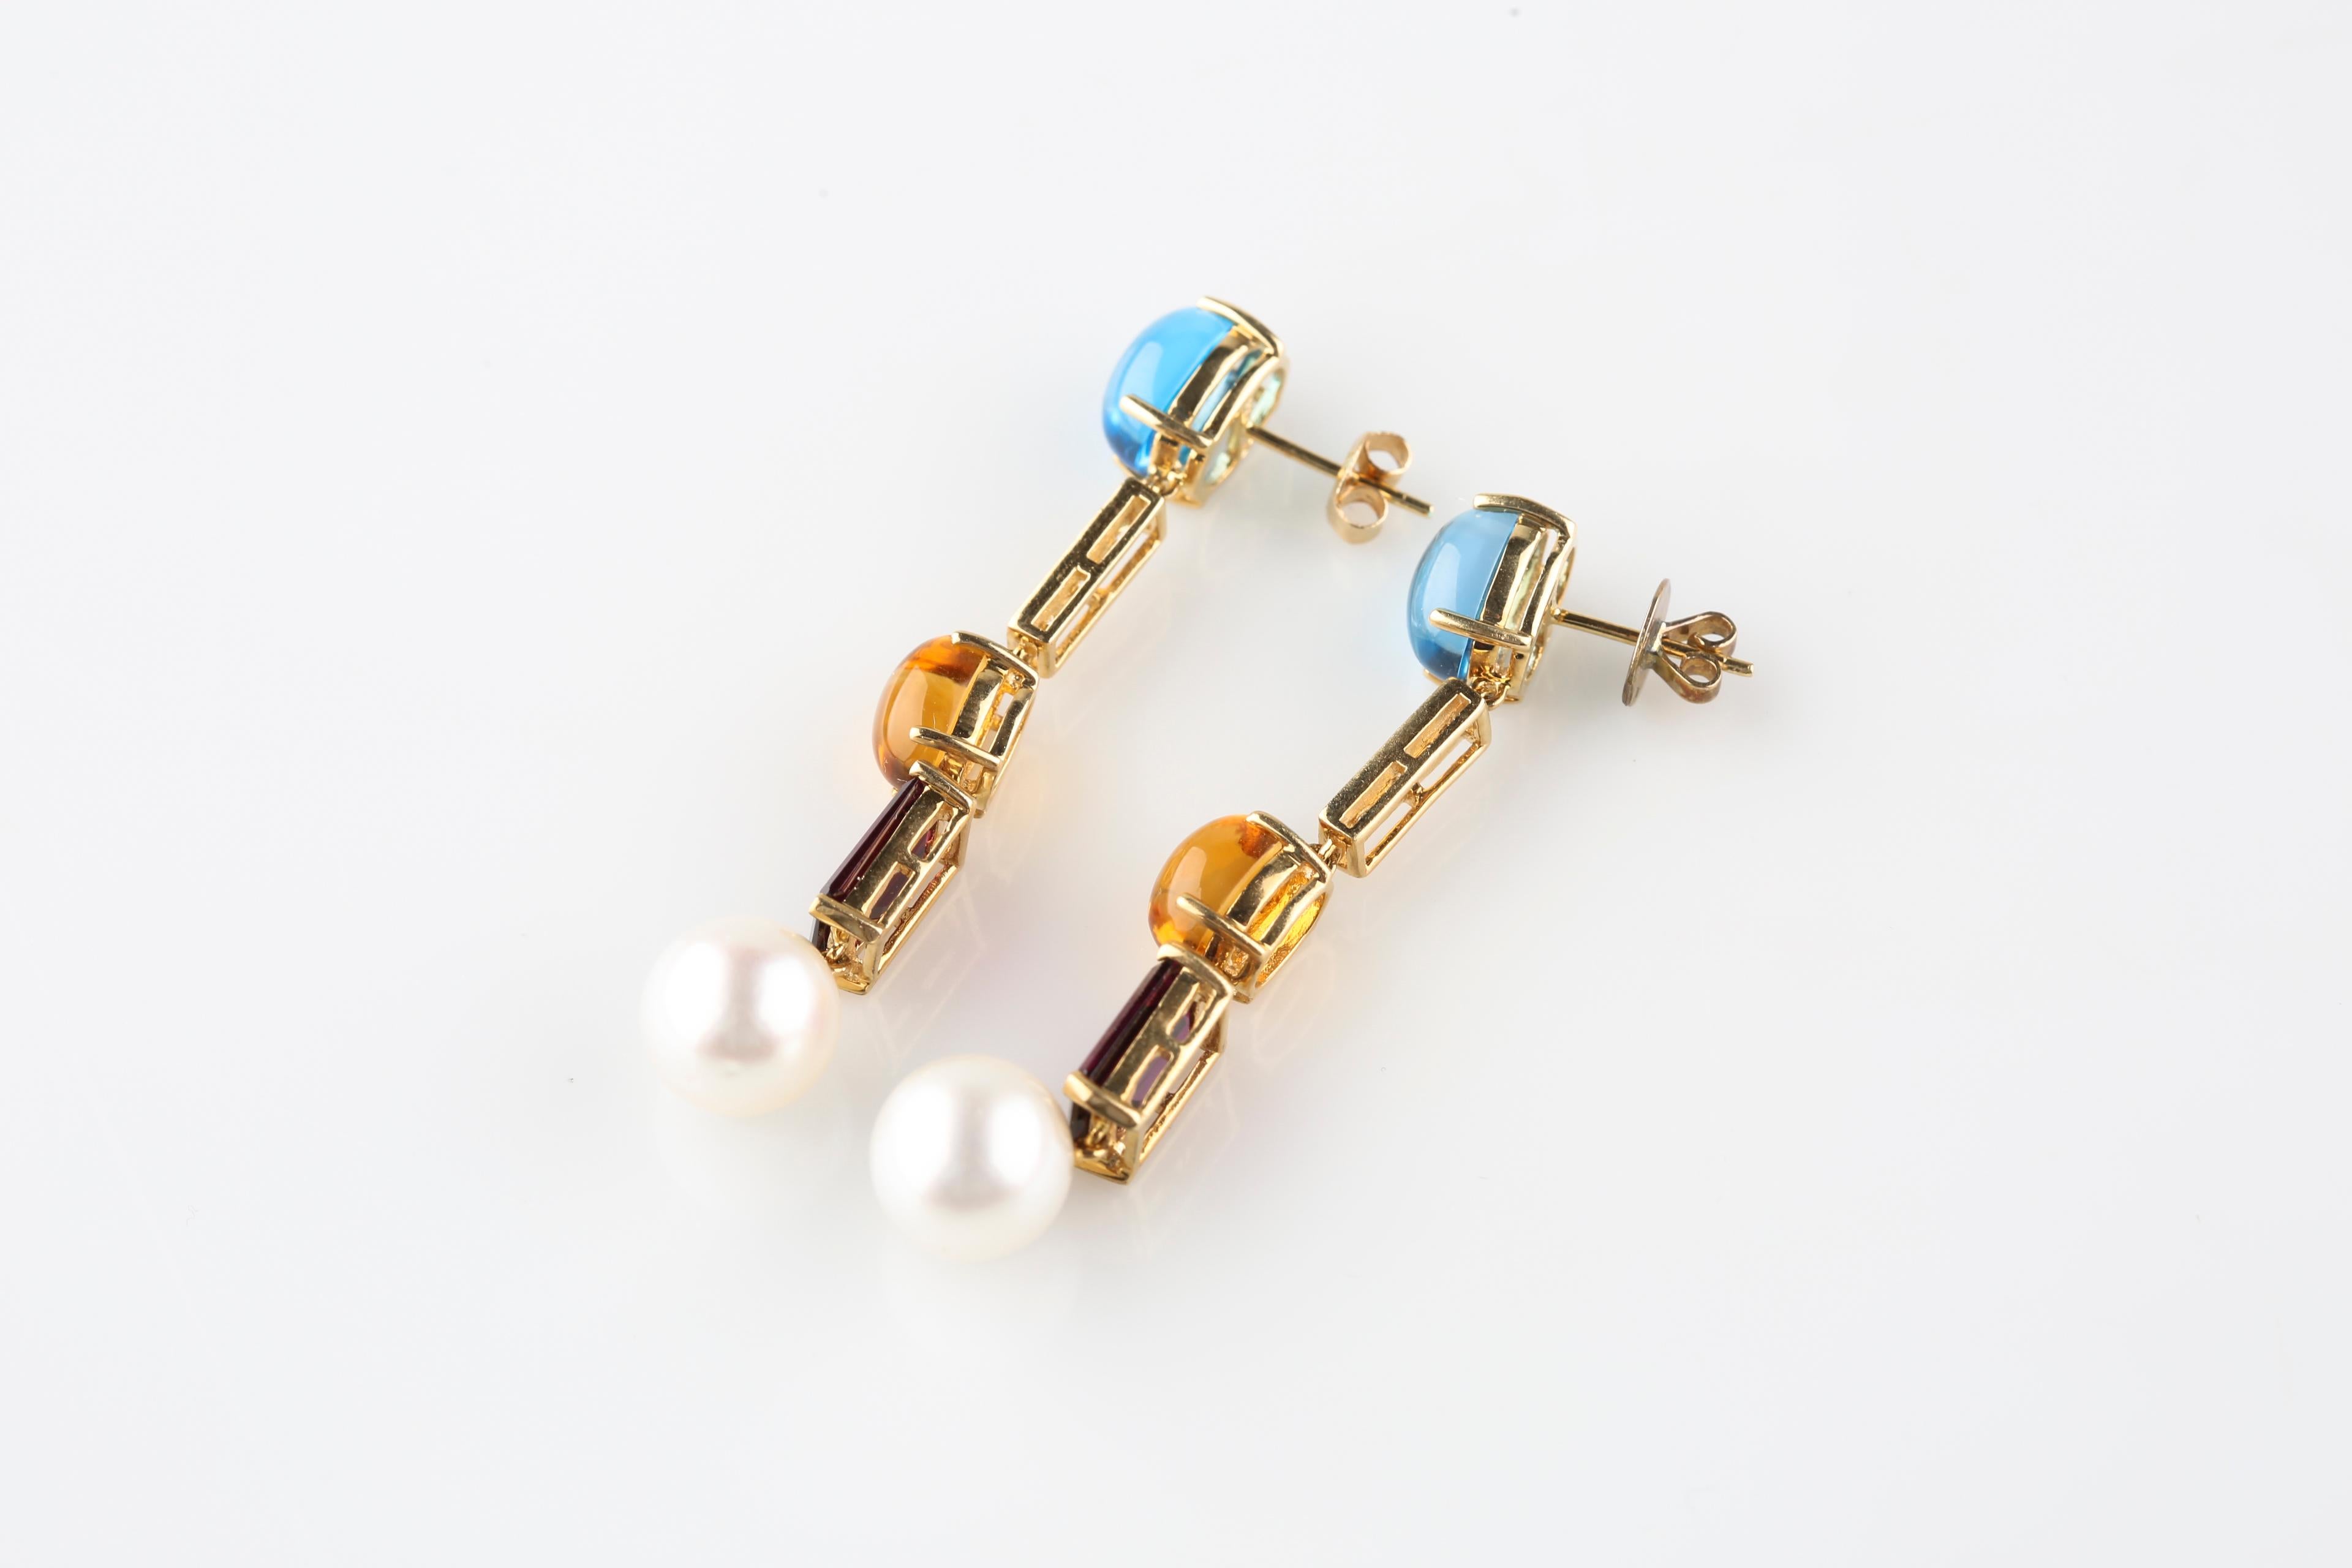 Gorgeous, Unique Multi-Color Gemstone, Diamond, and Pearl Drop Earrings
Each Earring Includes:
Prong Set Blue Topaz Cabochon (Appx 7 mm Wide x 9 mm Long)
Three 0.10 Ct Round Diamonds in Pave Plaque Settings (TDW for both earrings = 0.60 ct)
Prong